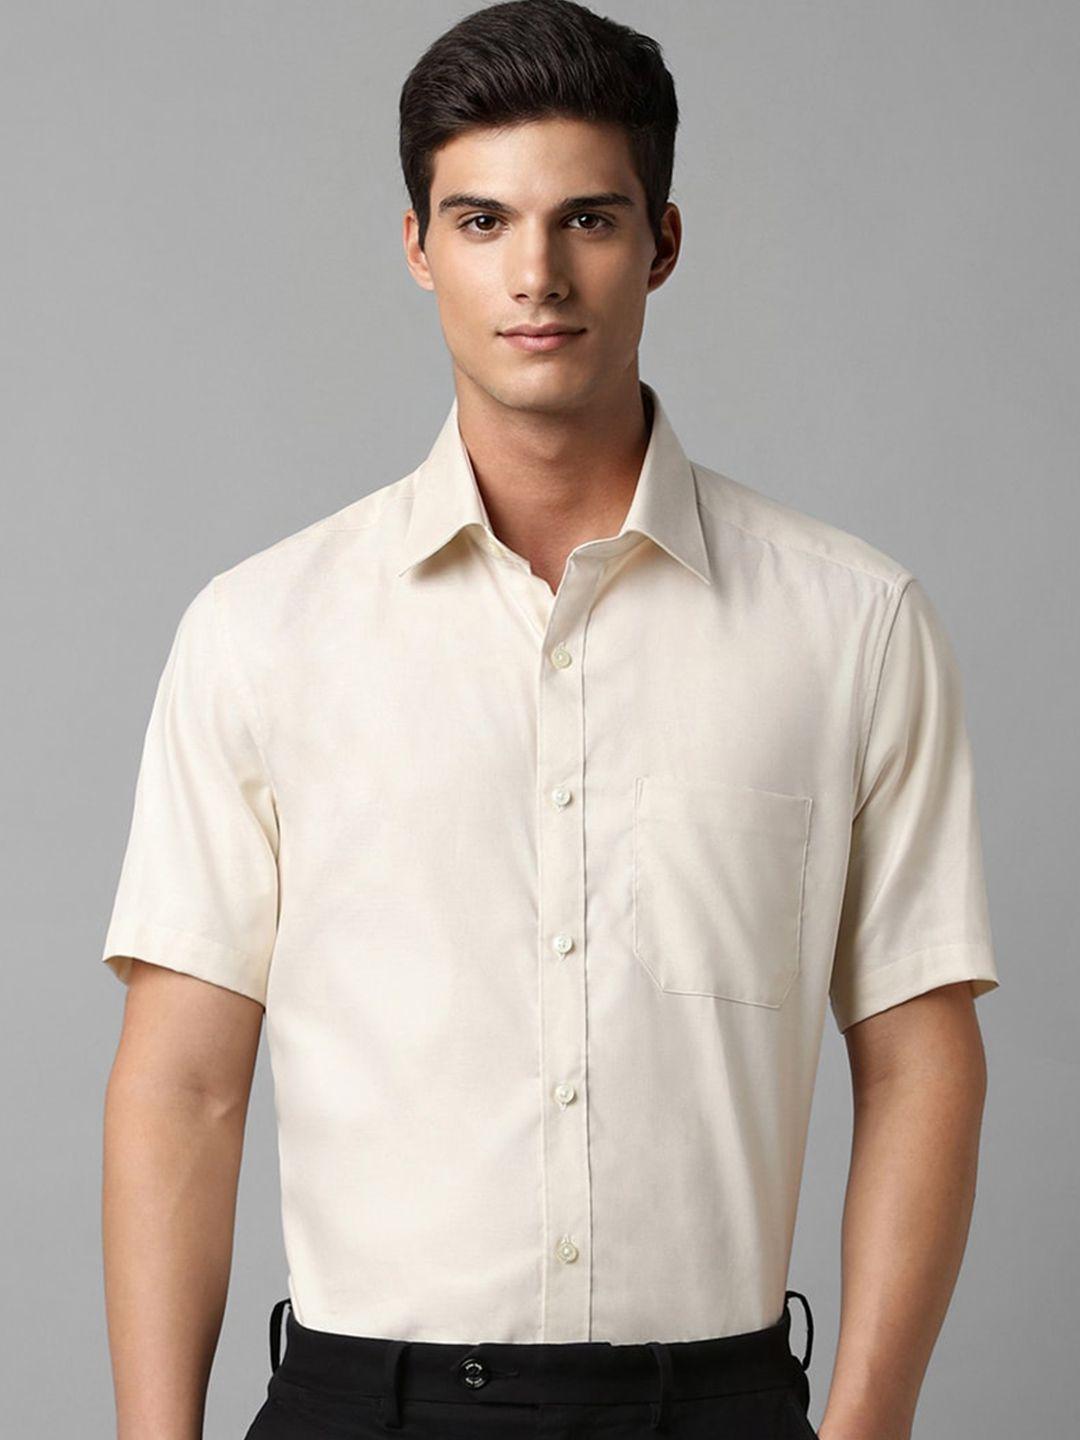 louis philippe spread collar regular fit opaque cotton formal shirt